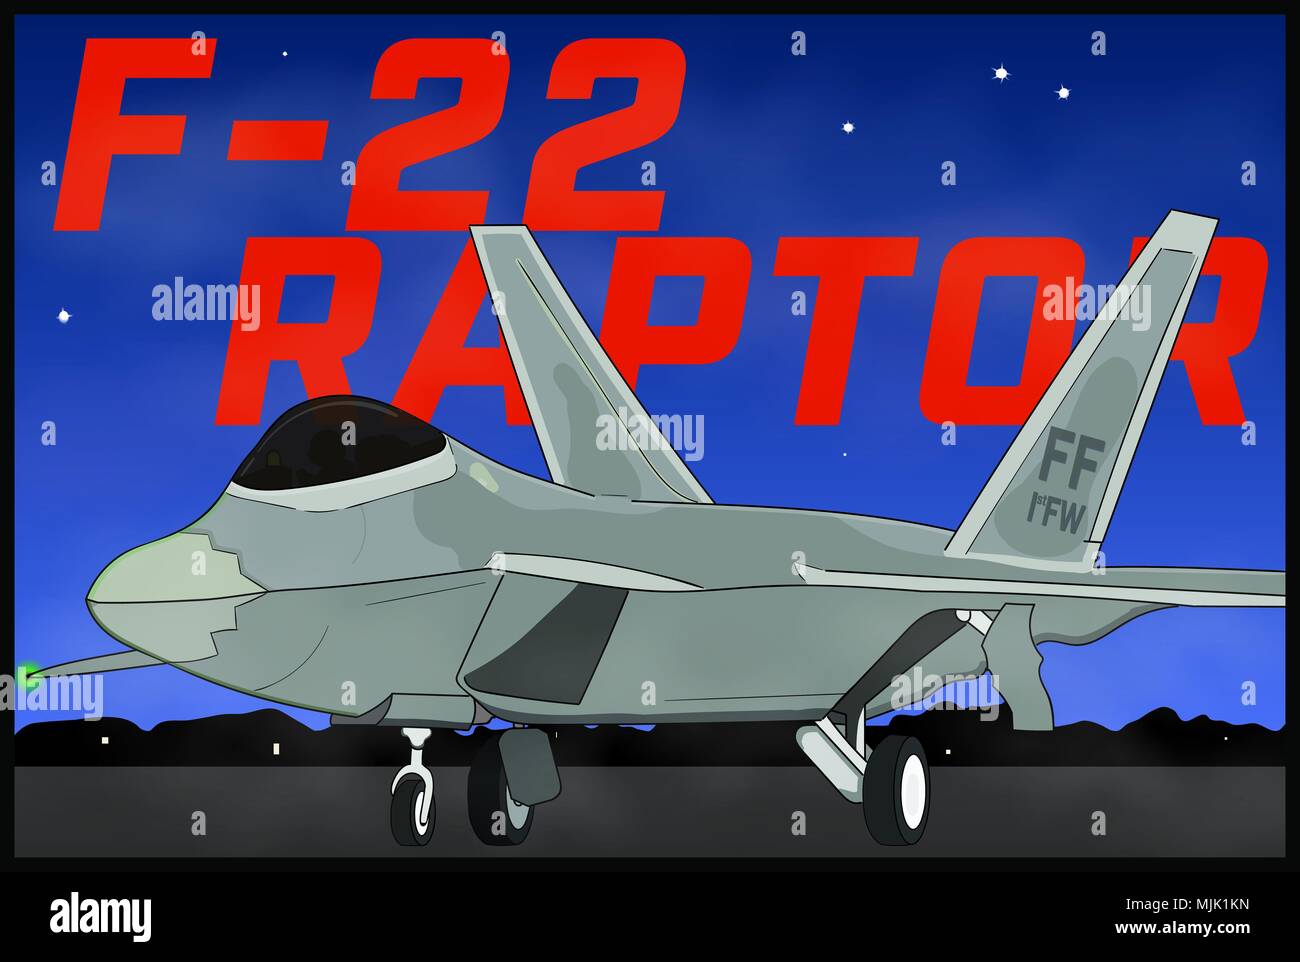 Graphic designed for social media to garner interest and share facts about  the U.S. Air Force F-22 Raptors assigned to the 1st Fighter Wing at Joint  Base Langley-Eustis, Va. The F-22 has